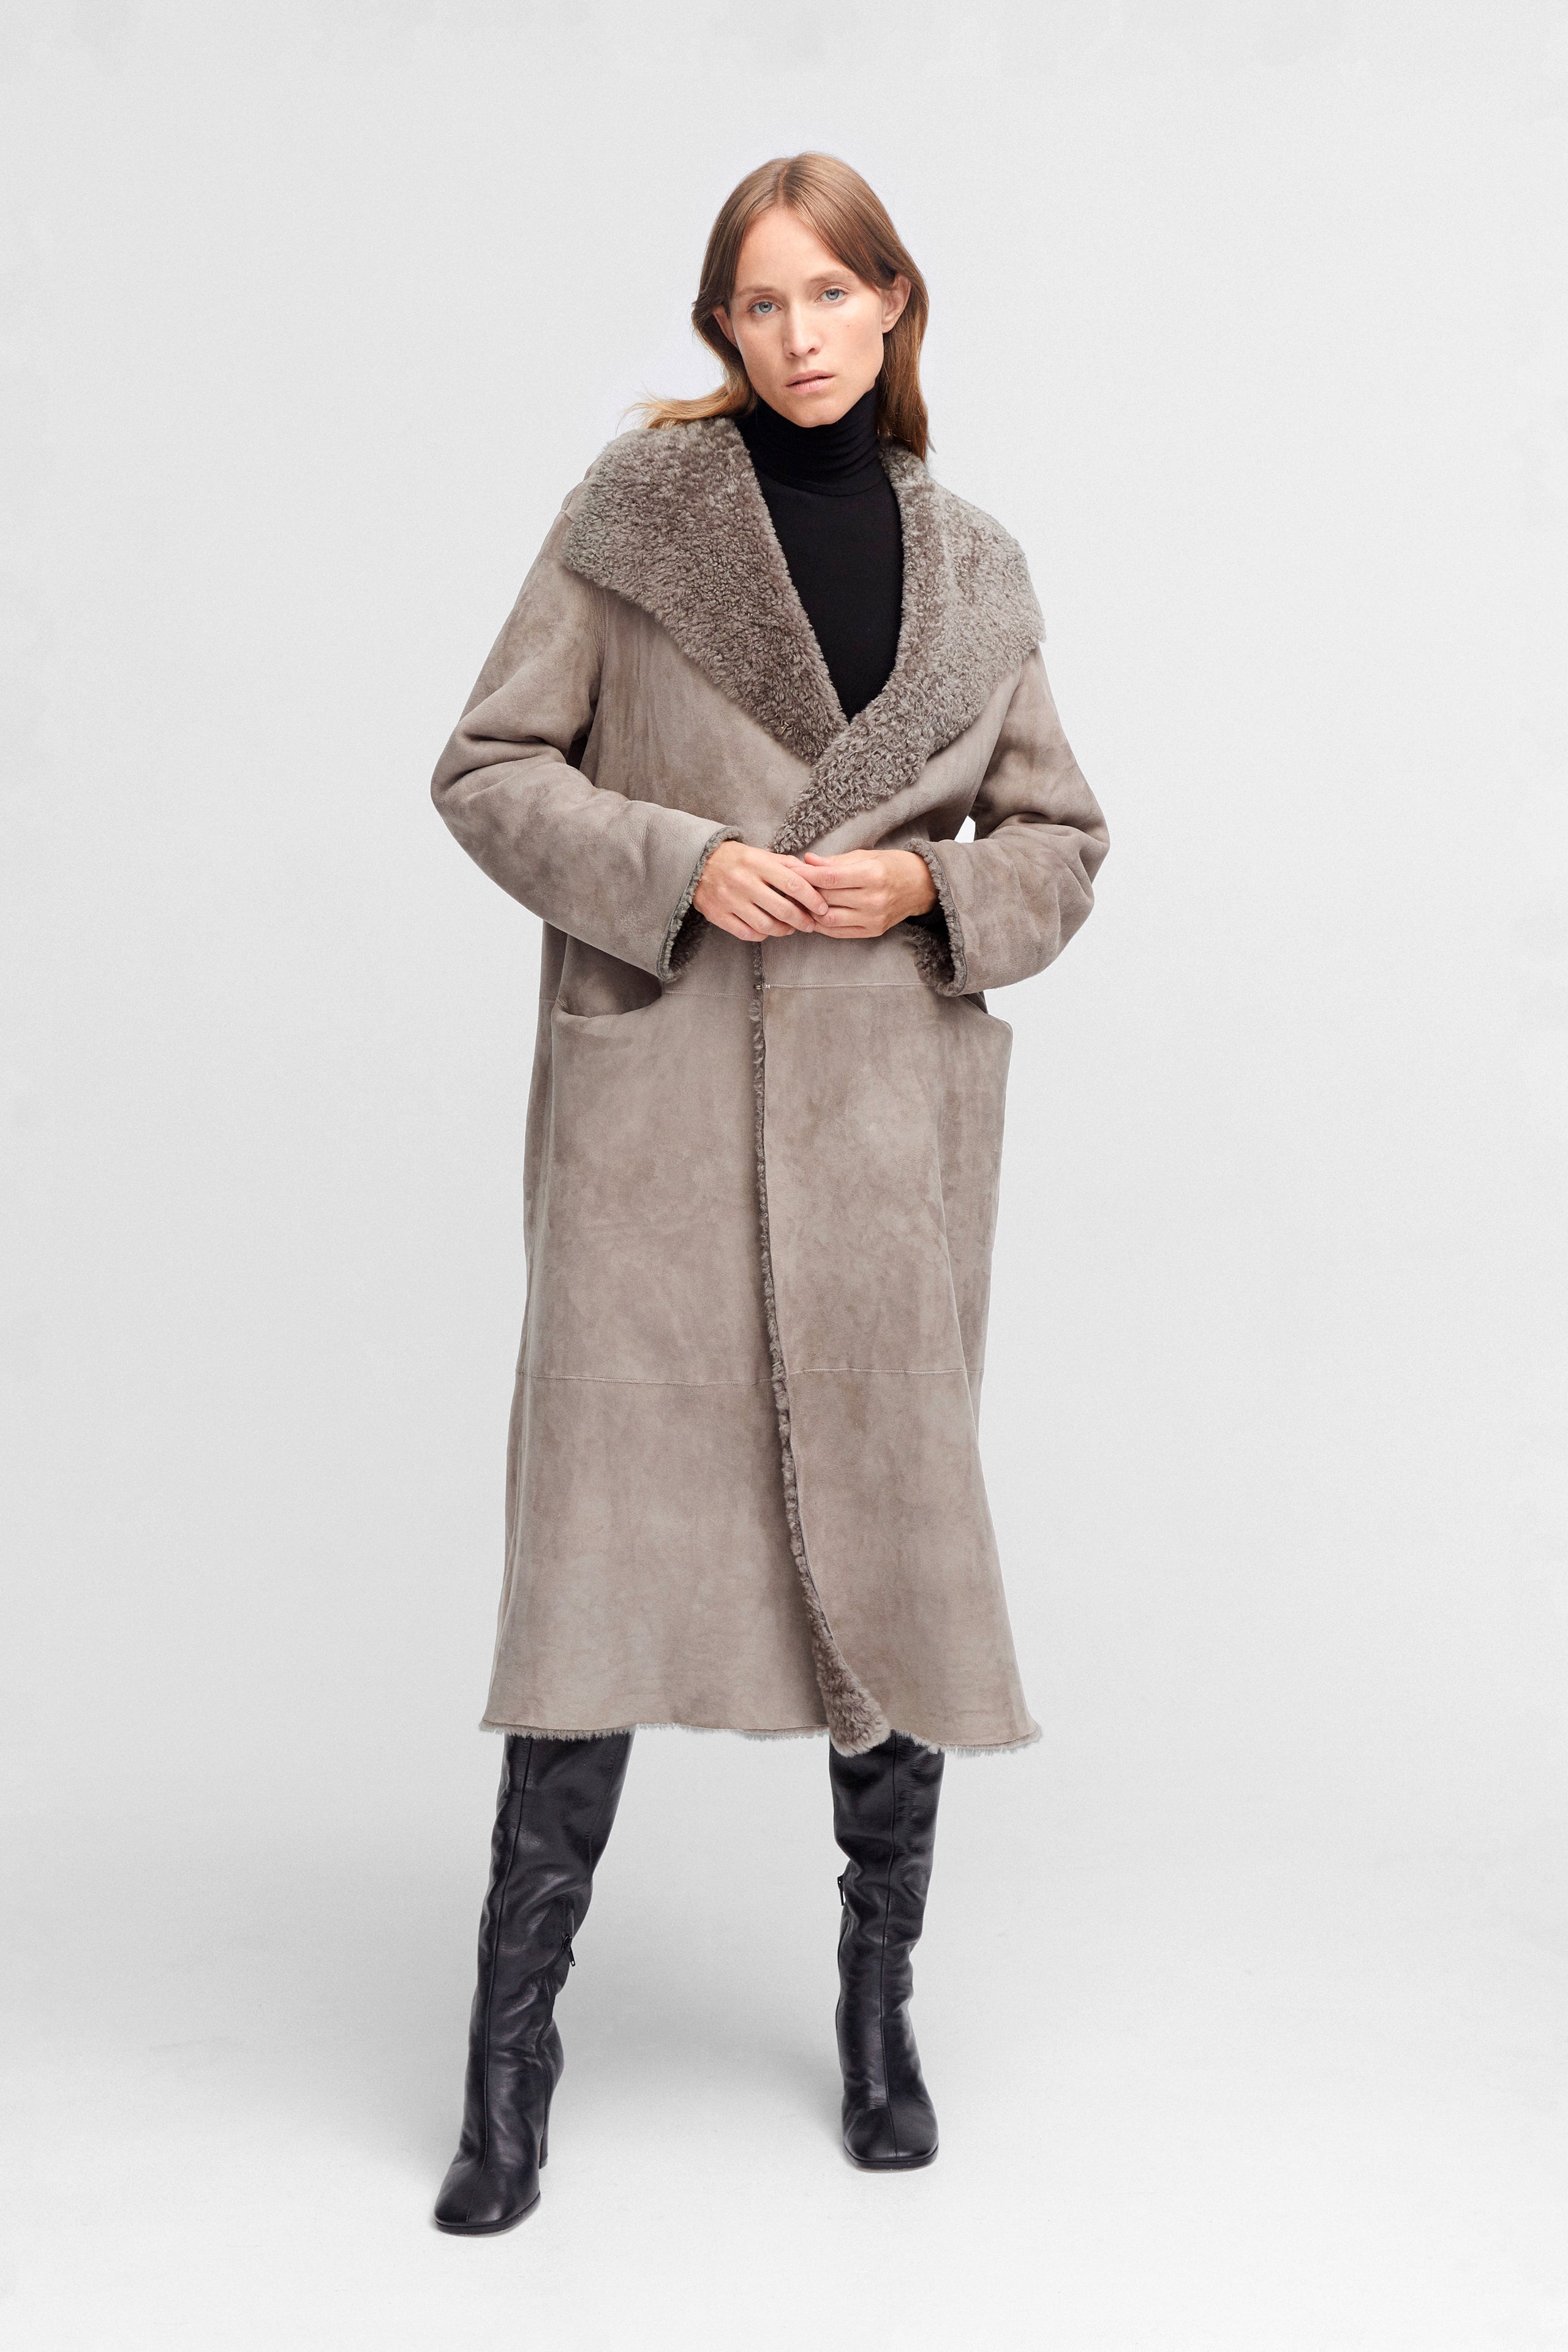 Model is wearing the Birthday Coat Iceland Grey Draped Shearling Coat Front